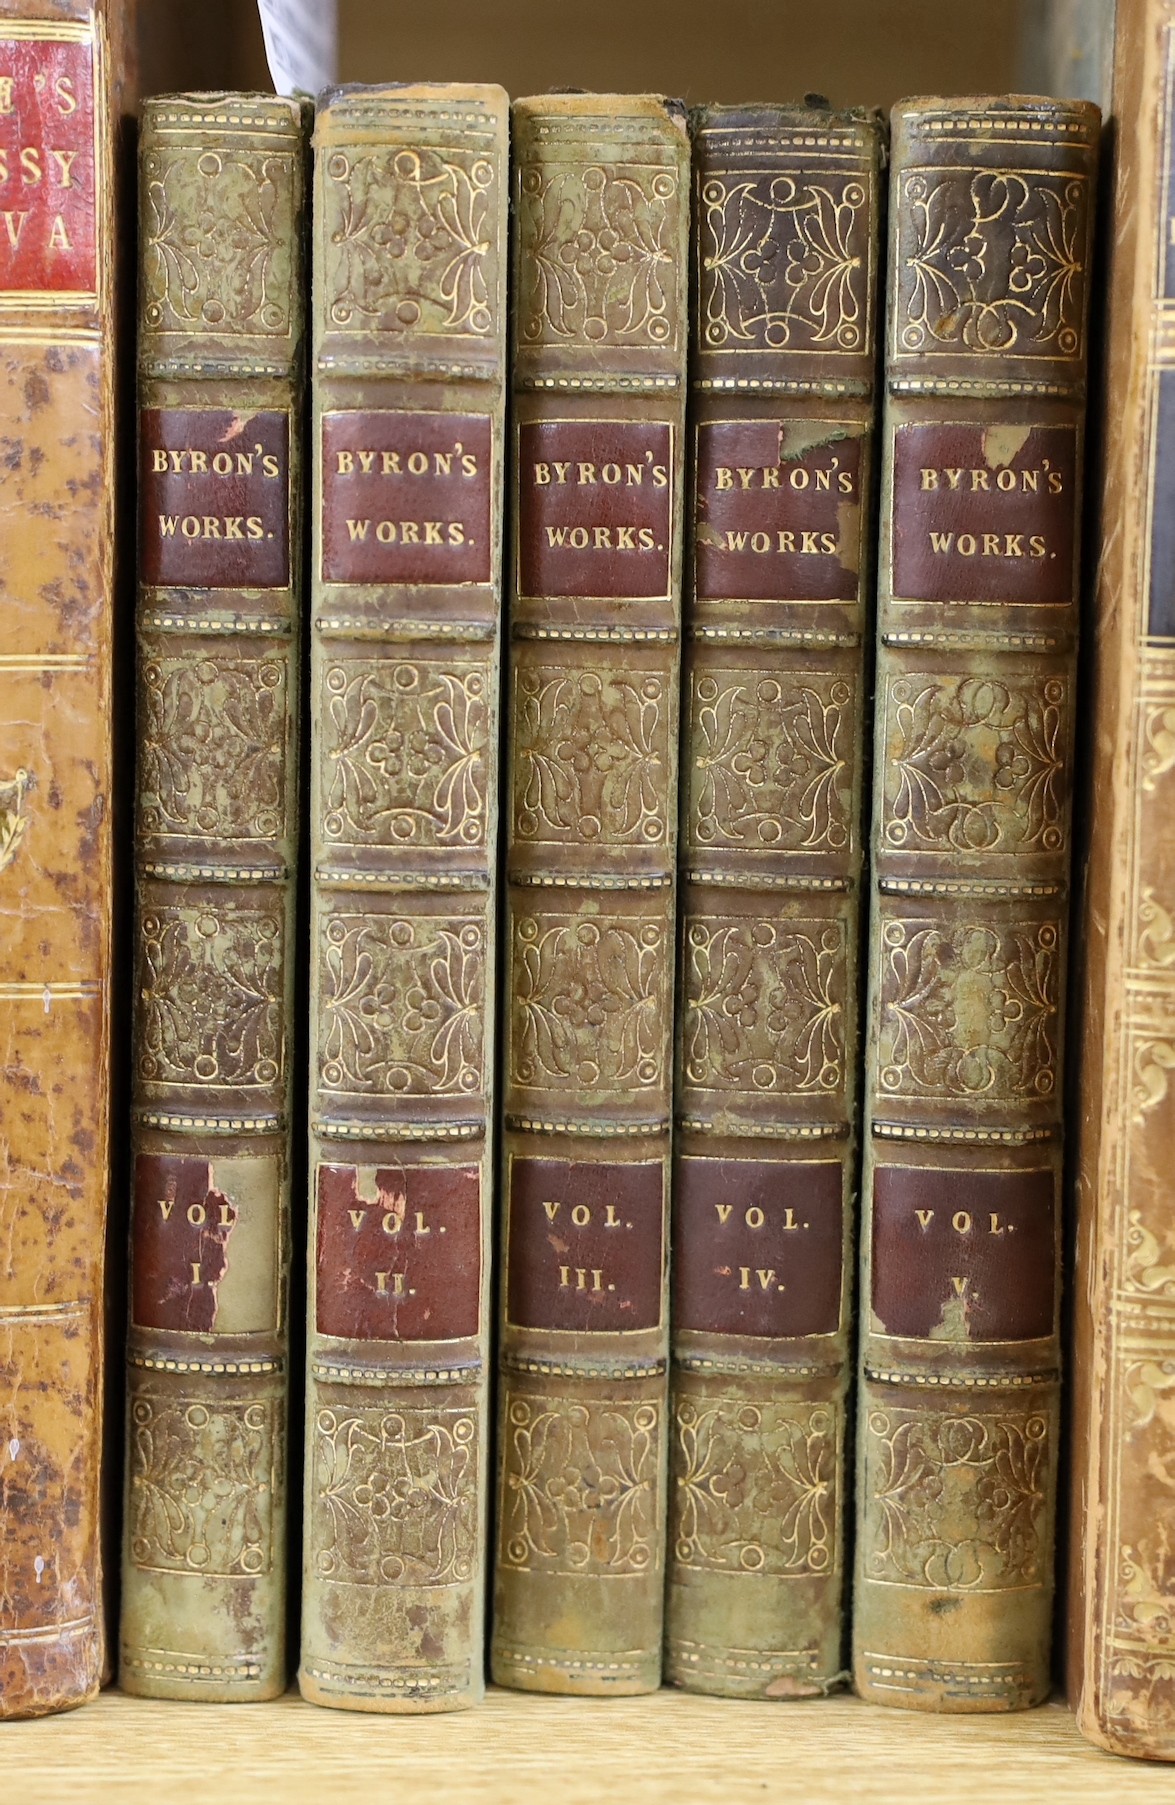 Byron, George Gordon Noel, Lord - Works, 5 vols, 8vo, gilt panelled green calf, contemporary ink presentation inscriptions to front fly leaves, John Murray, London.